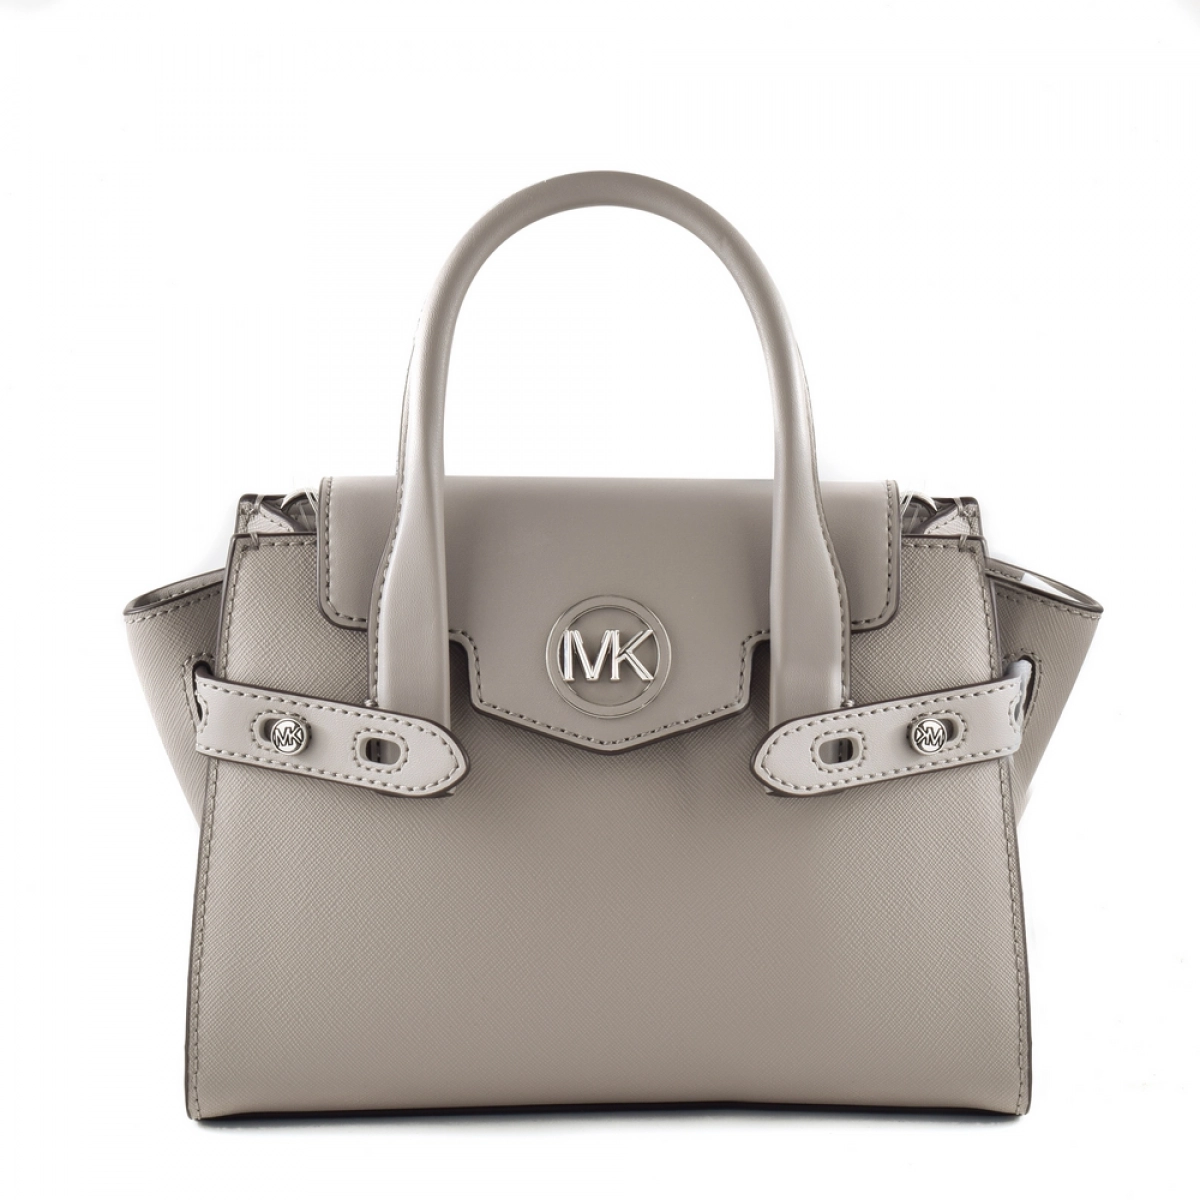 BOLSO MICHAEL KORS 35S2SNMS5L-PEARL-GREY 35S2SNMSLPGRY